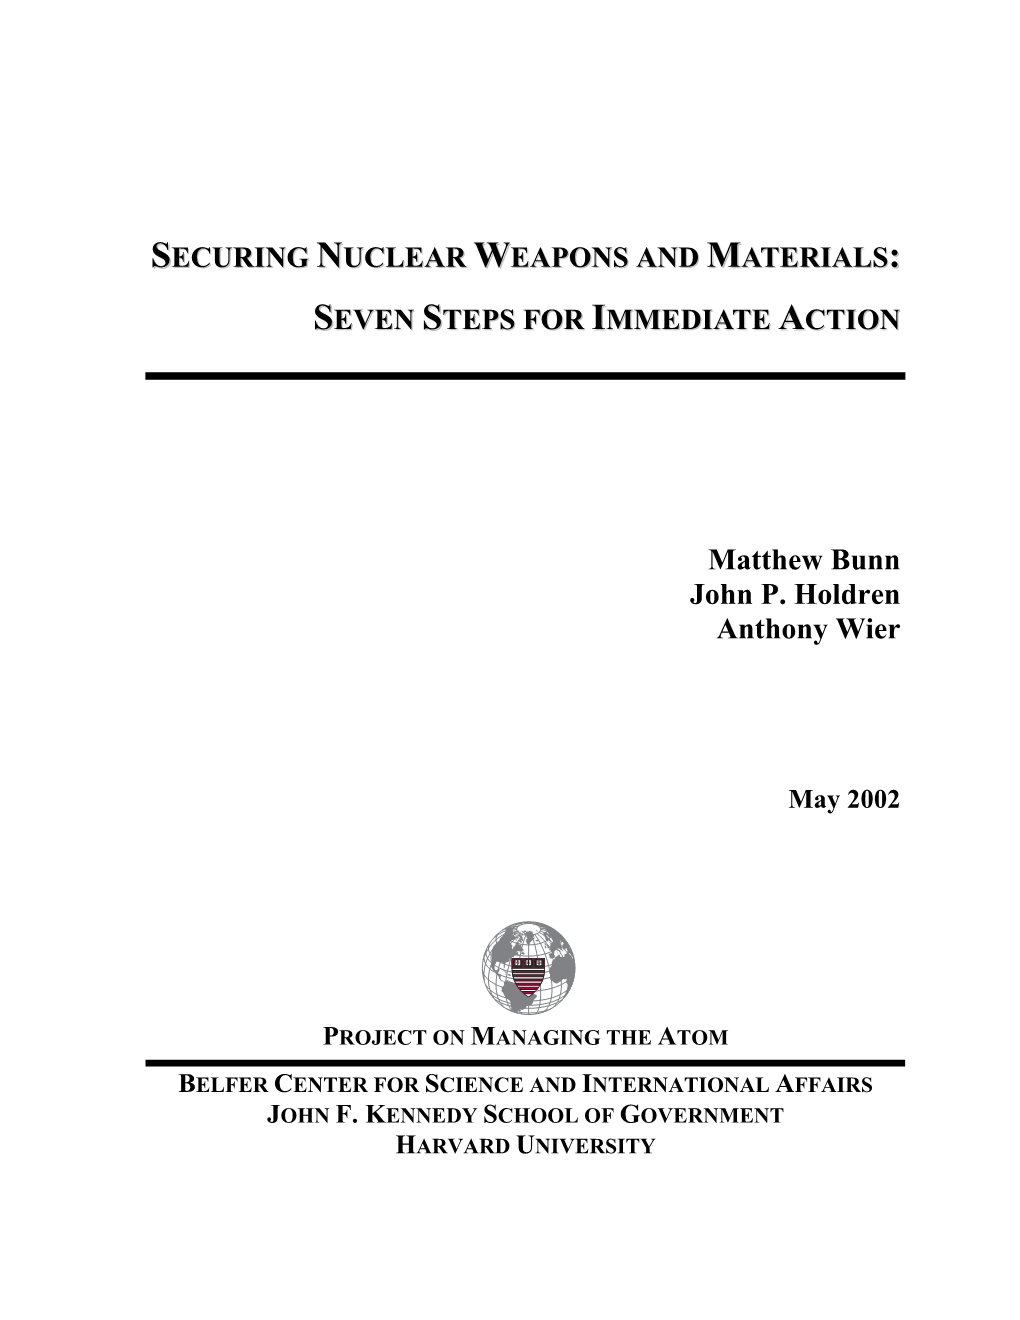 Securing Nuclear Weapons and Materials: Seven Steps for Immediate Action